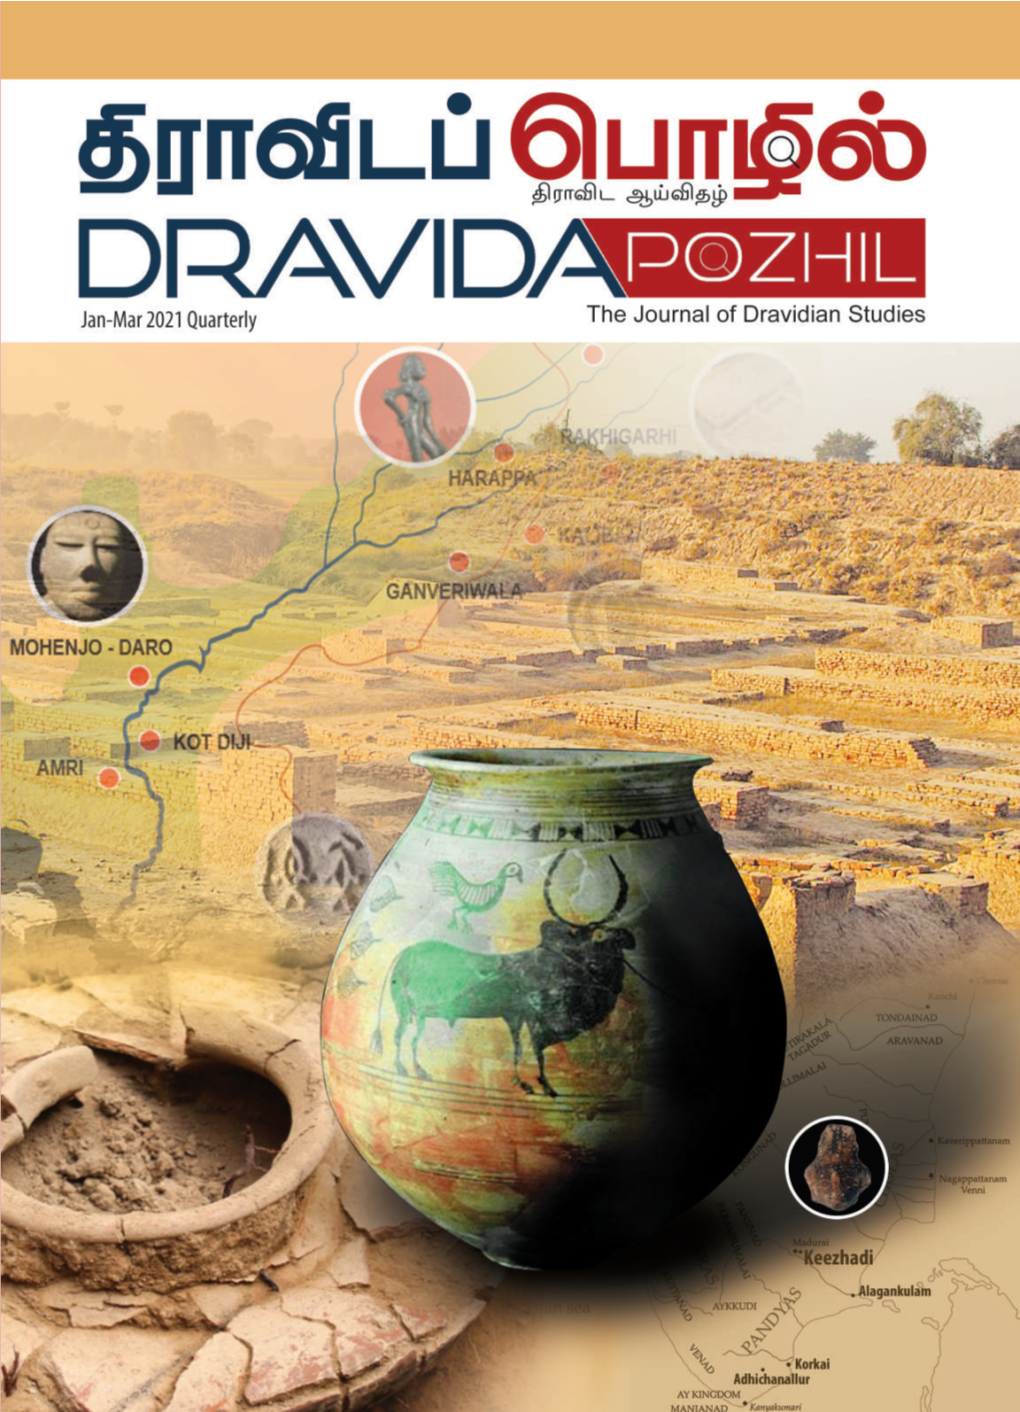 Greetings for the Launch of Dravida Pozhil 20